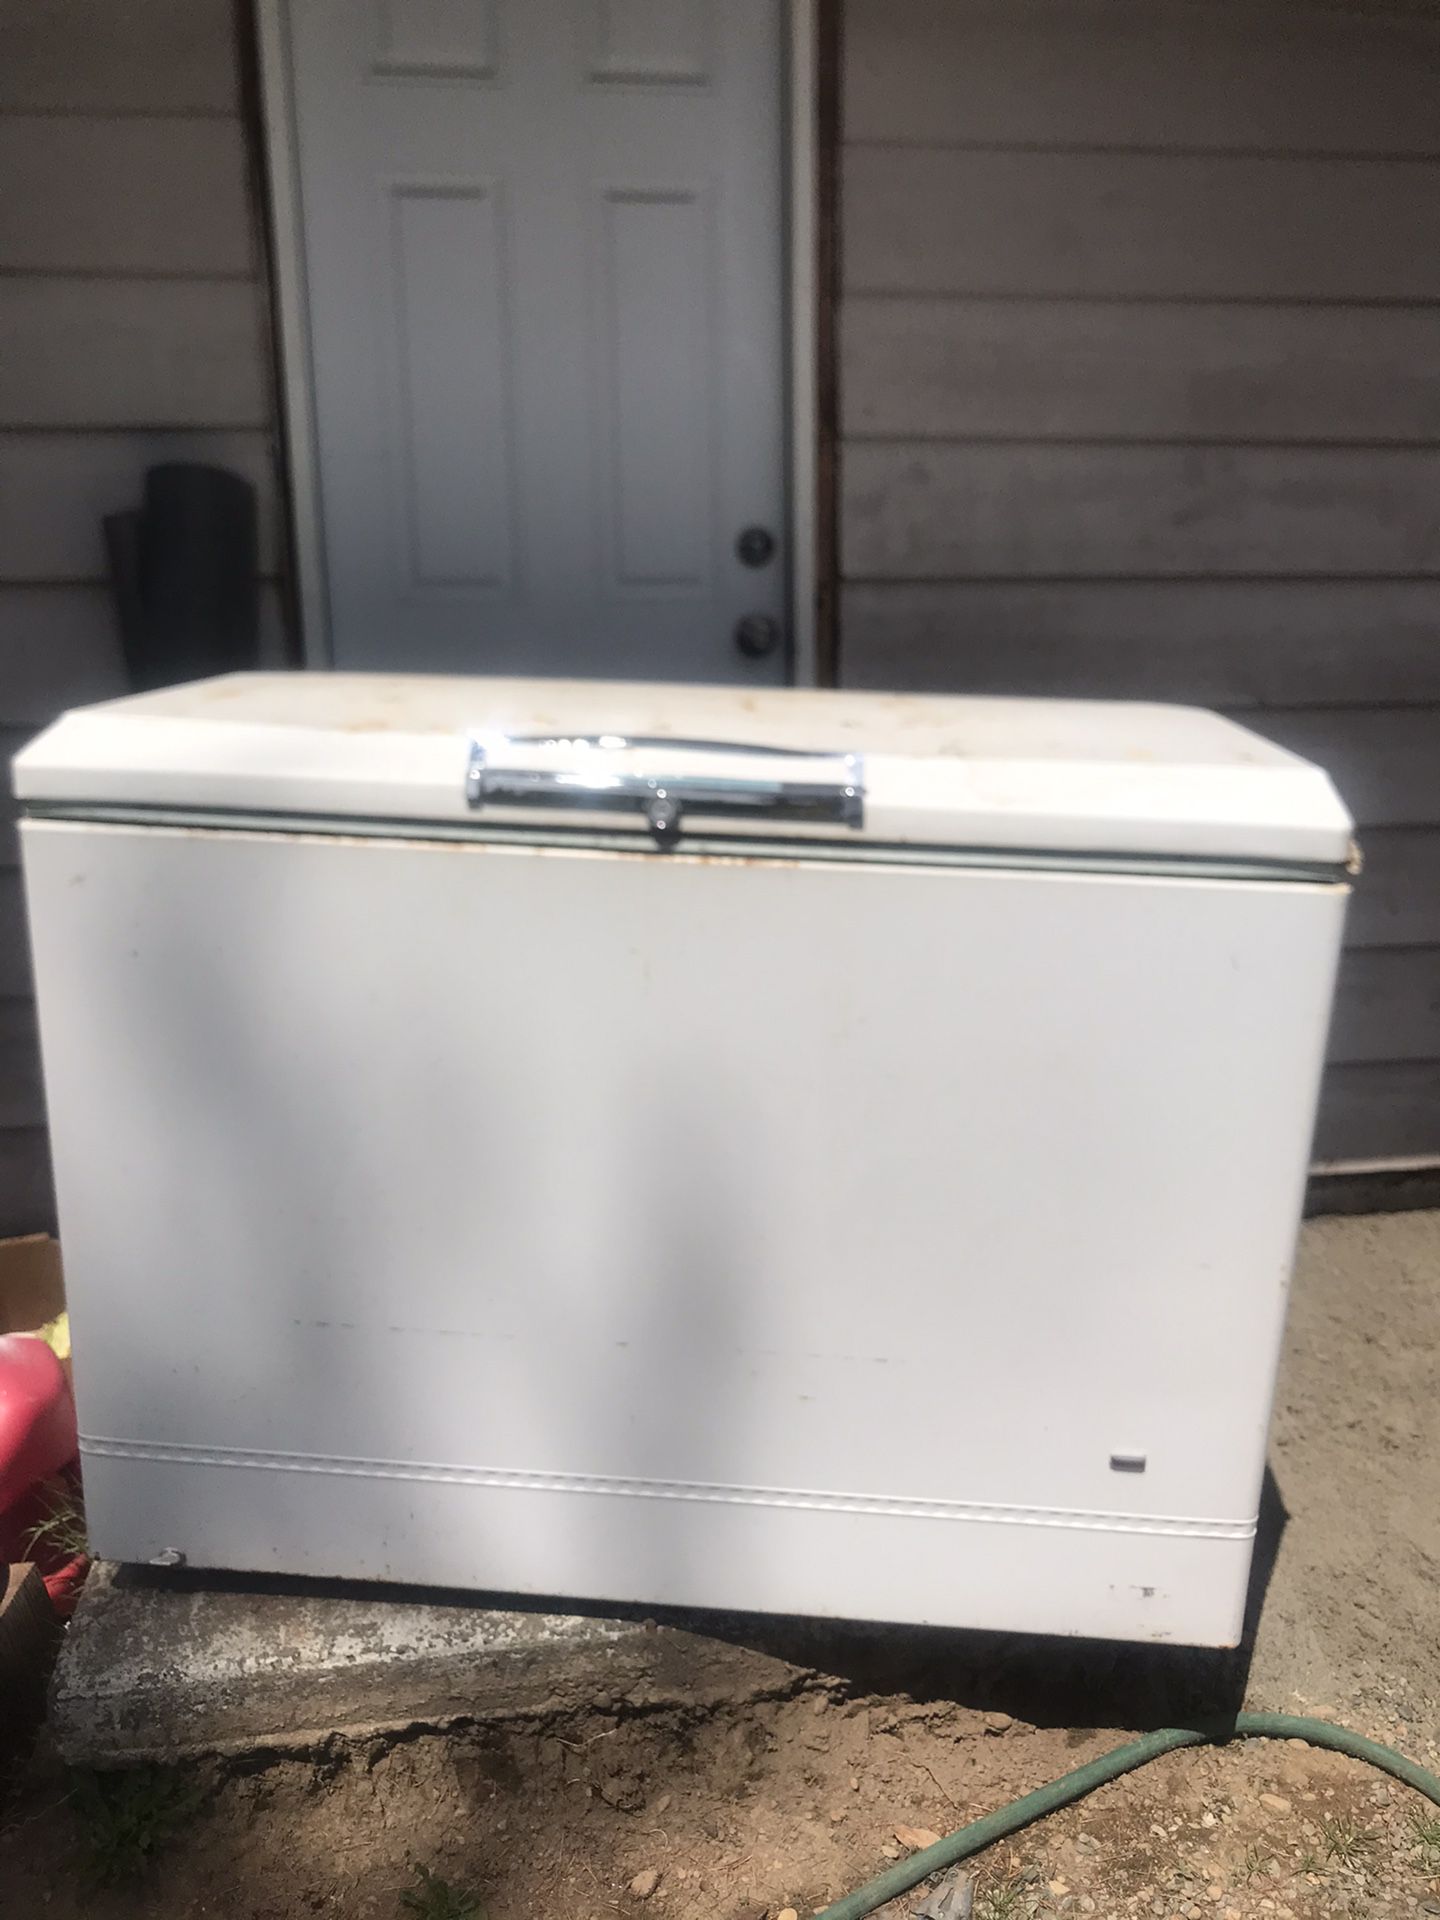 Sears coldspot deep freezer smoke smell when plugged in